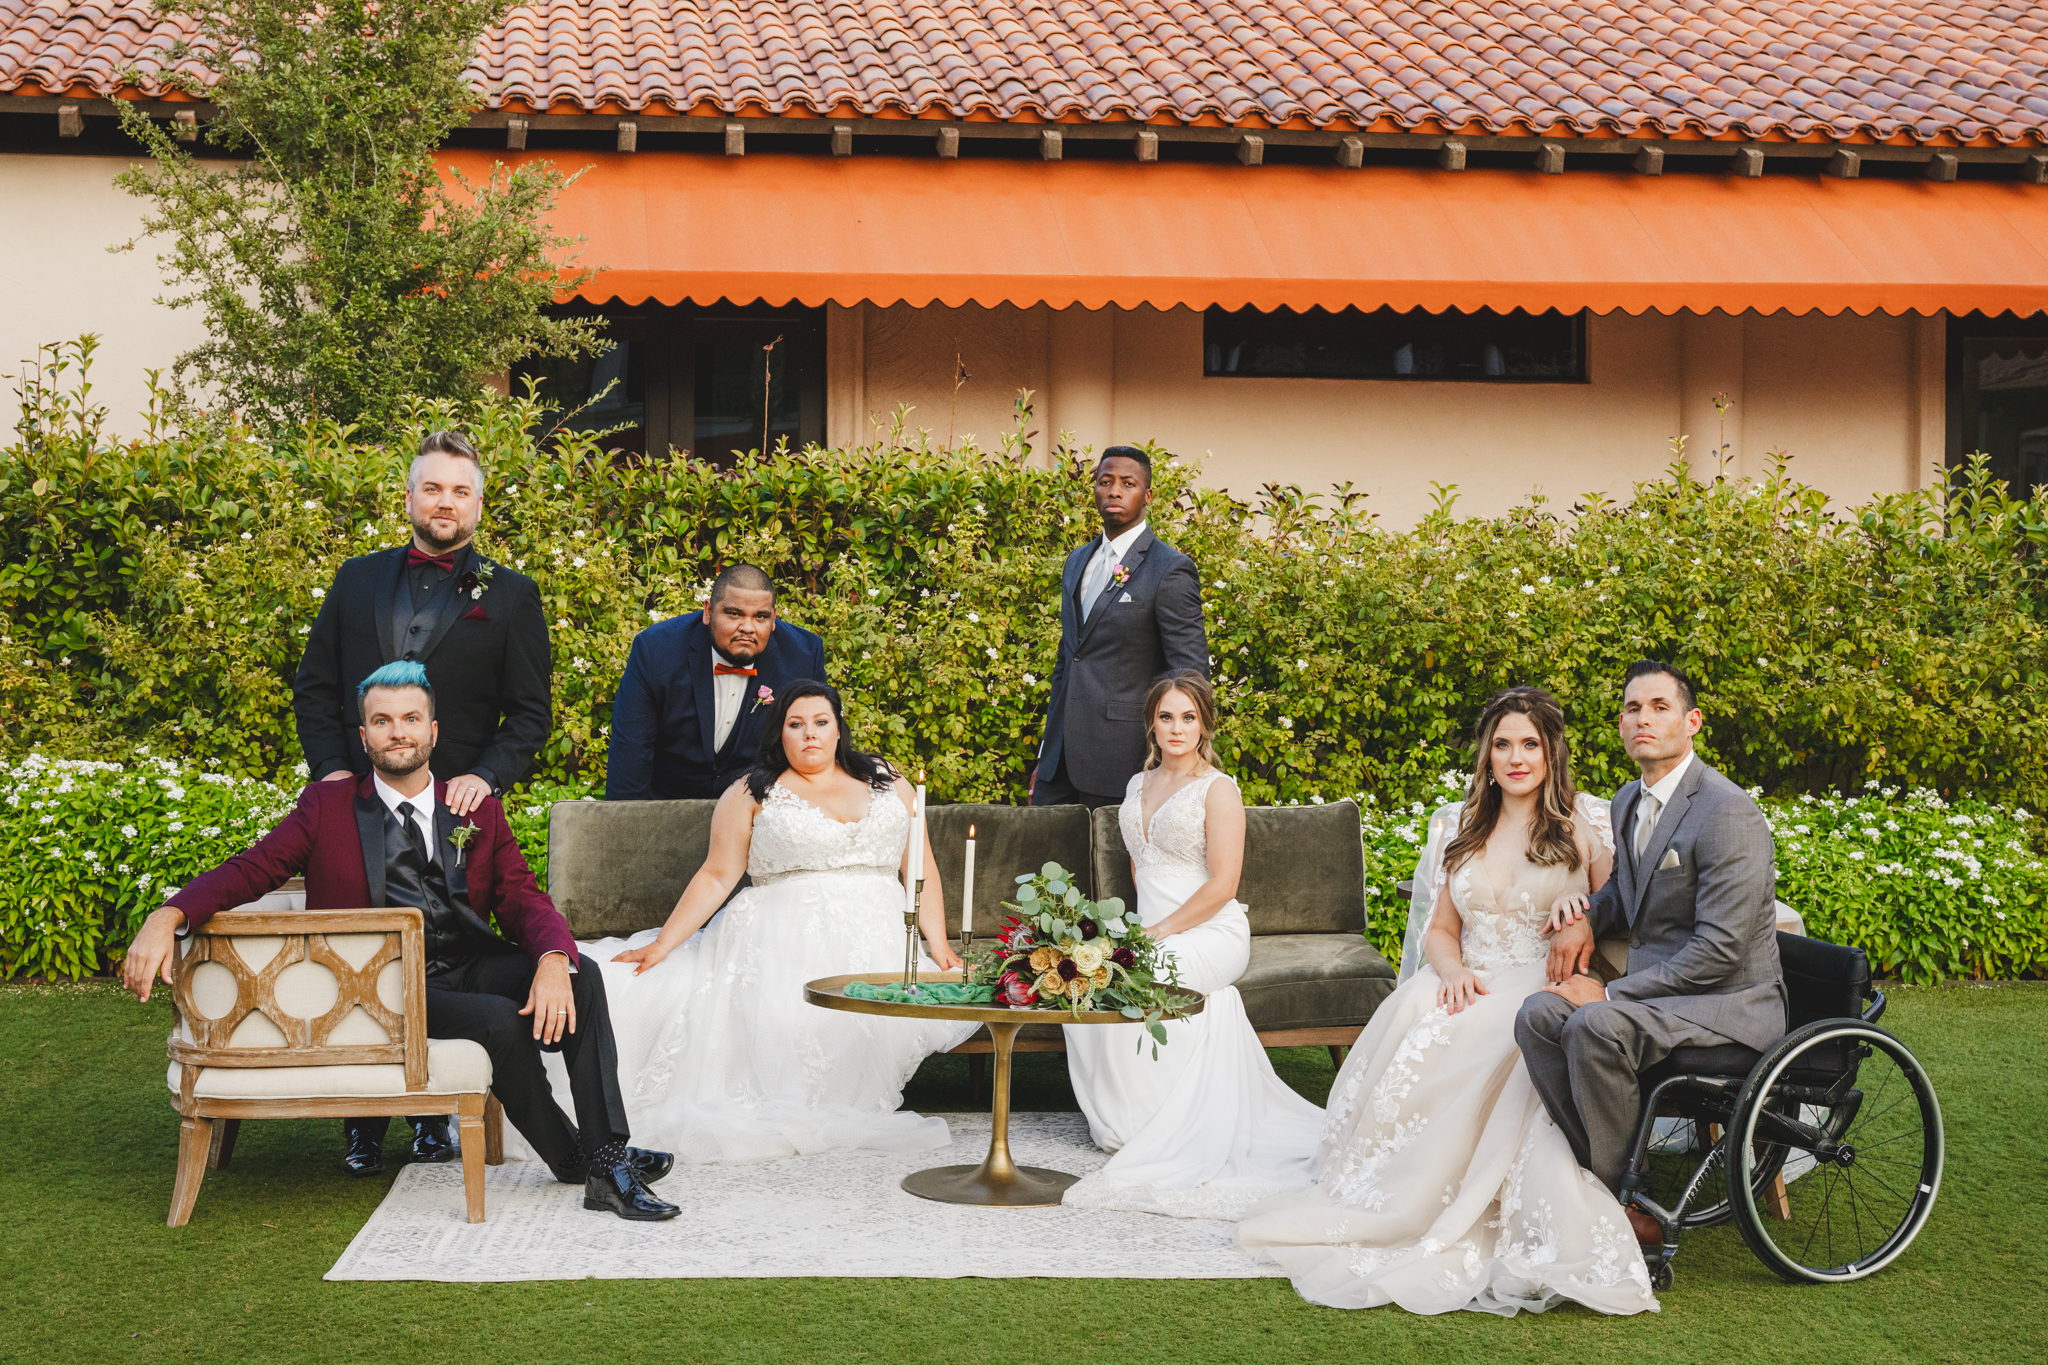 A diverse group of brides and grooms poses in front of furniture at a resort